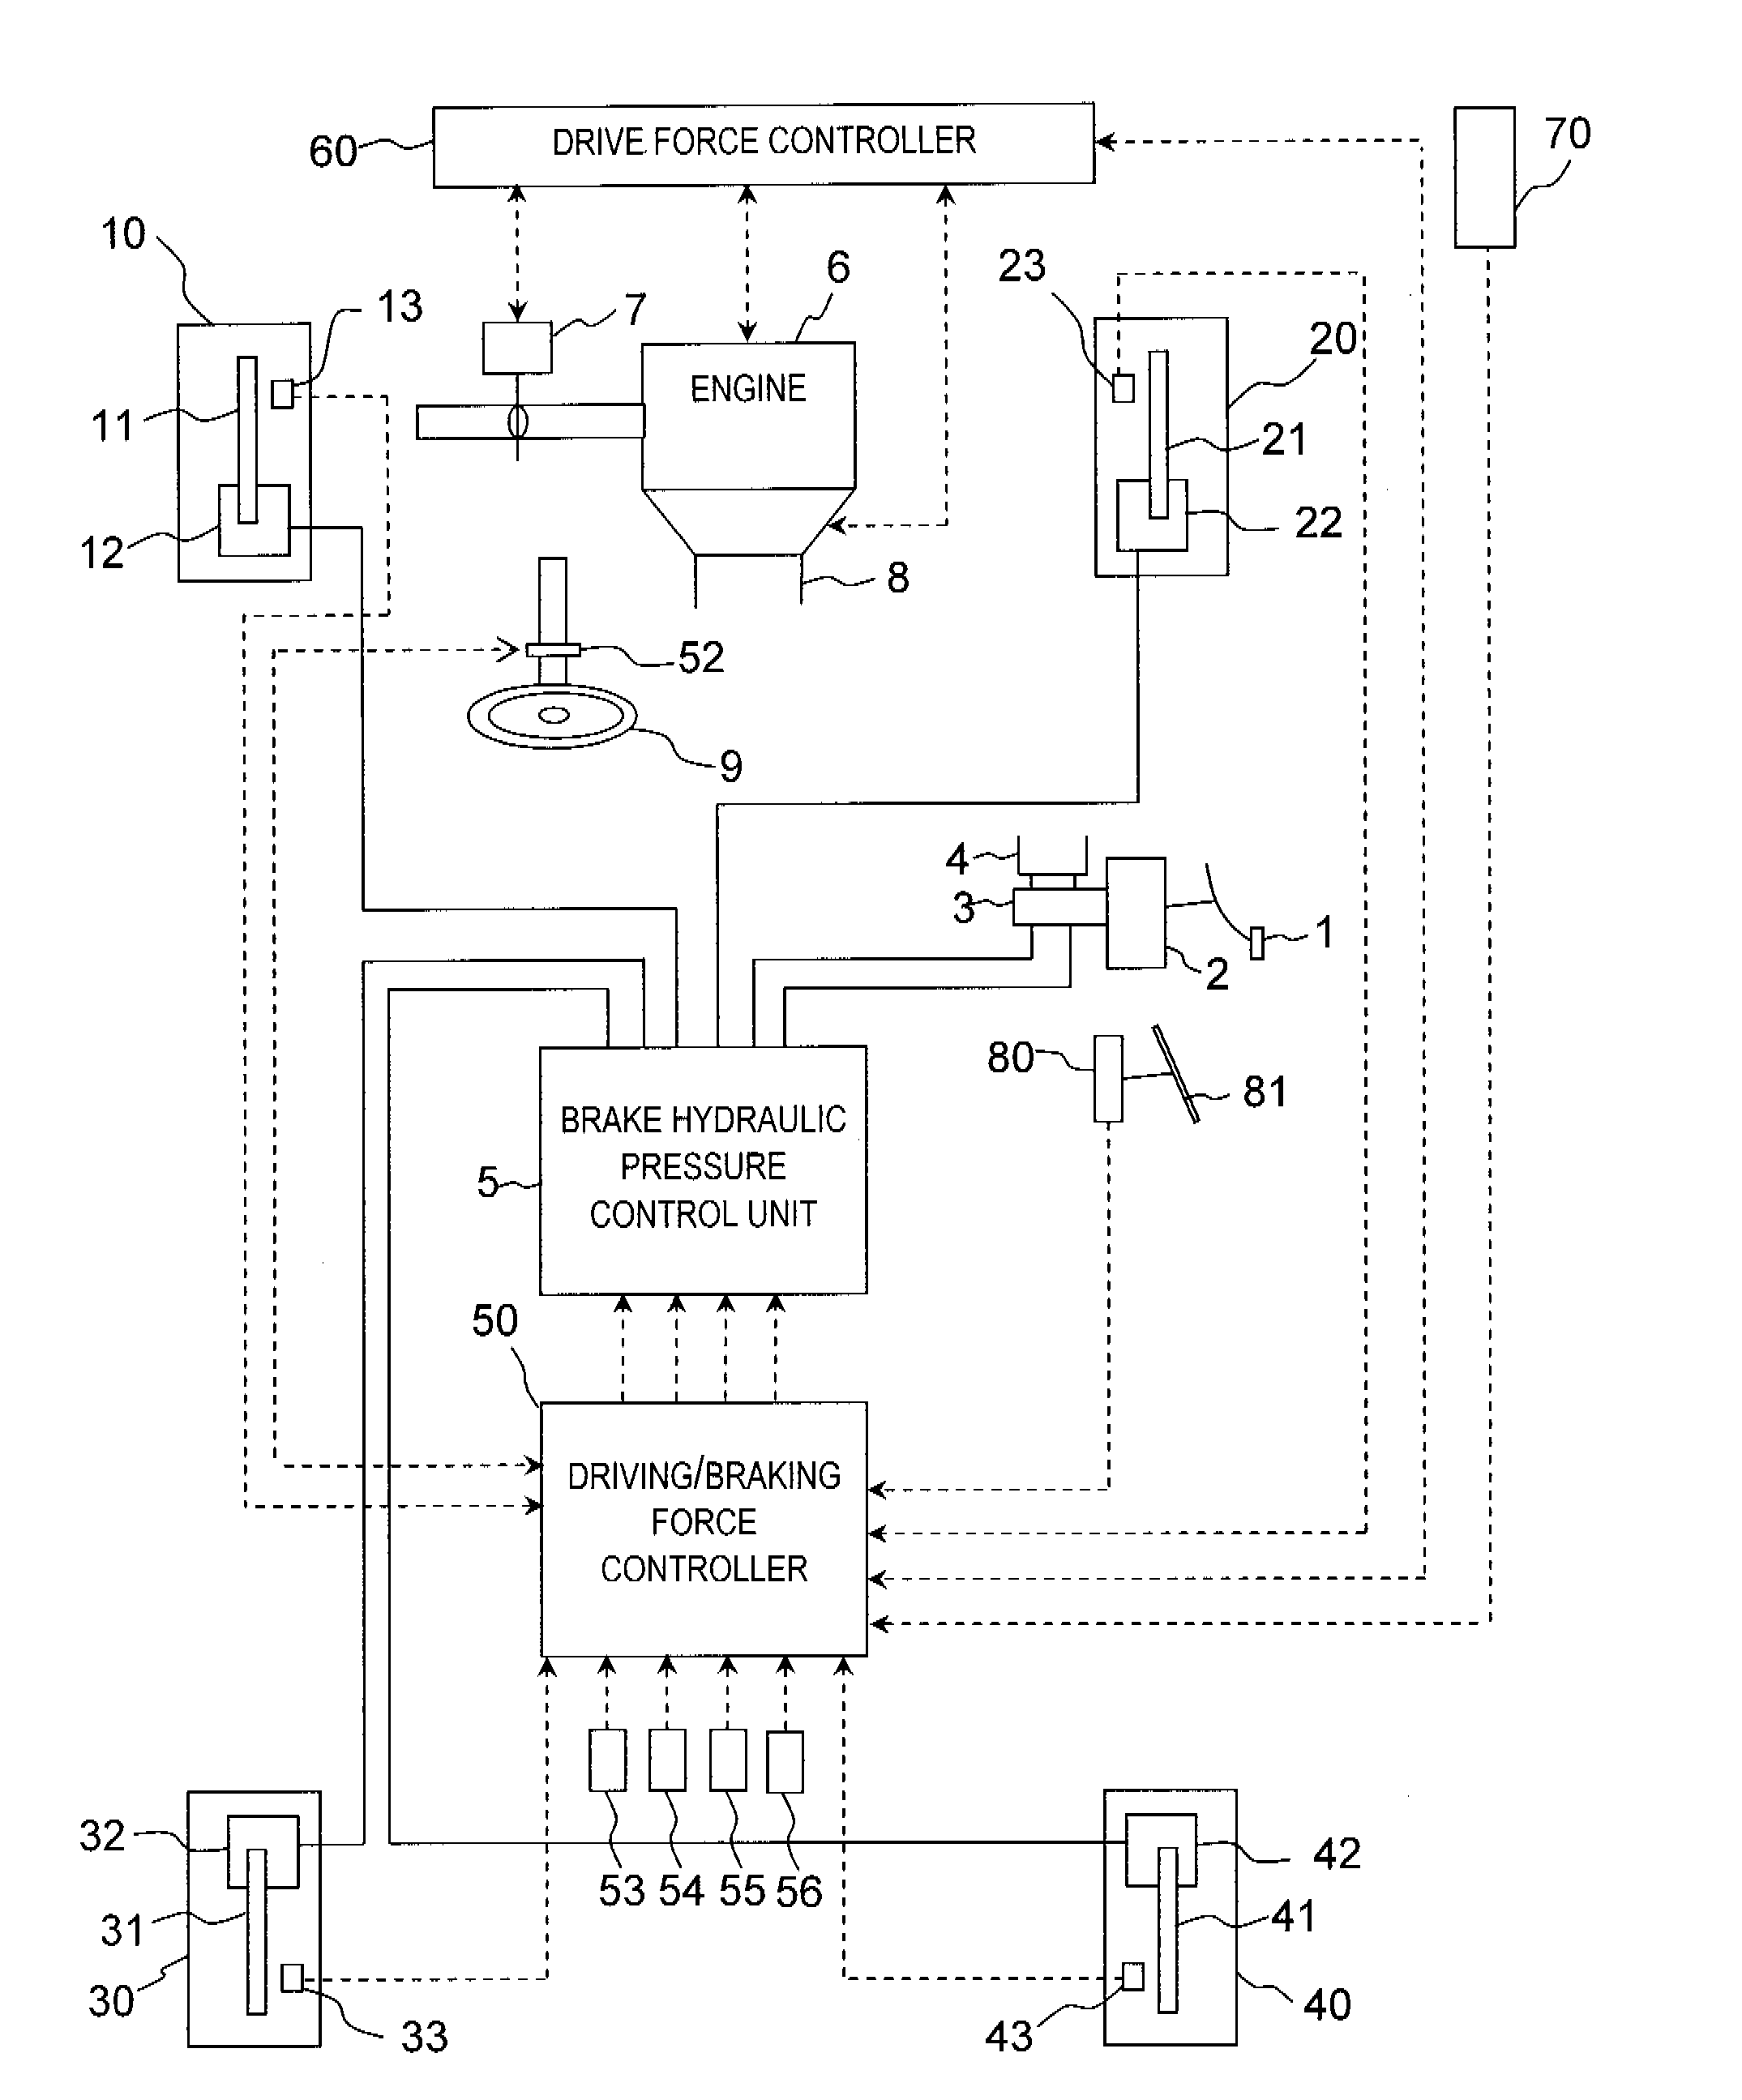 Vehicle headway maintenance assist system and method